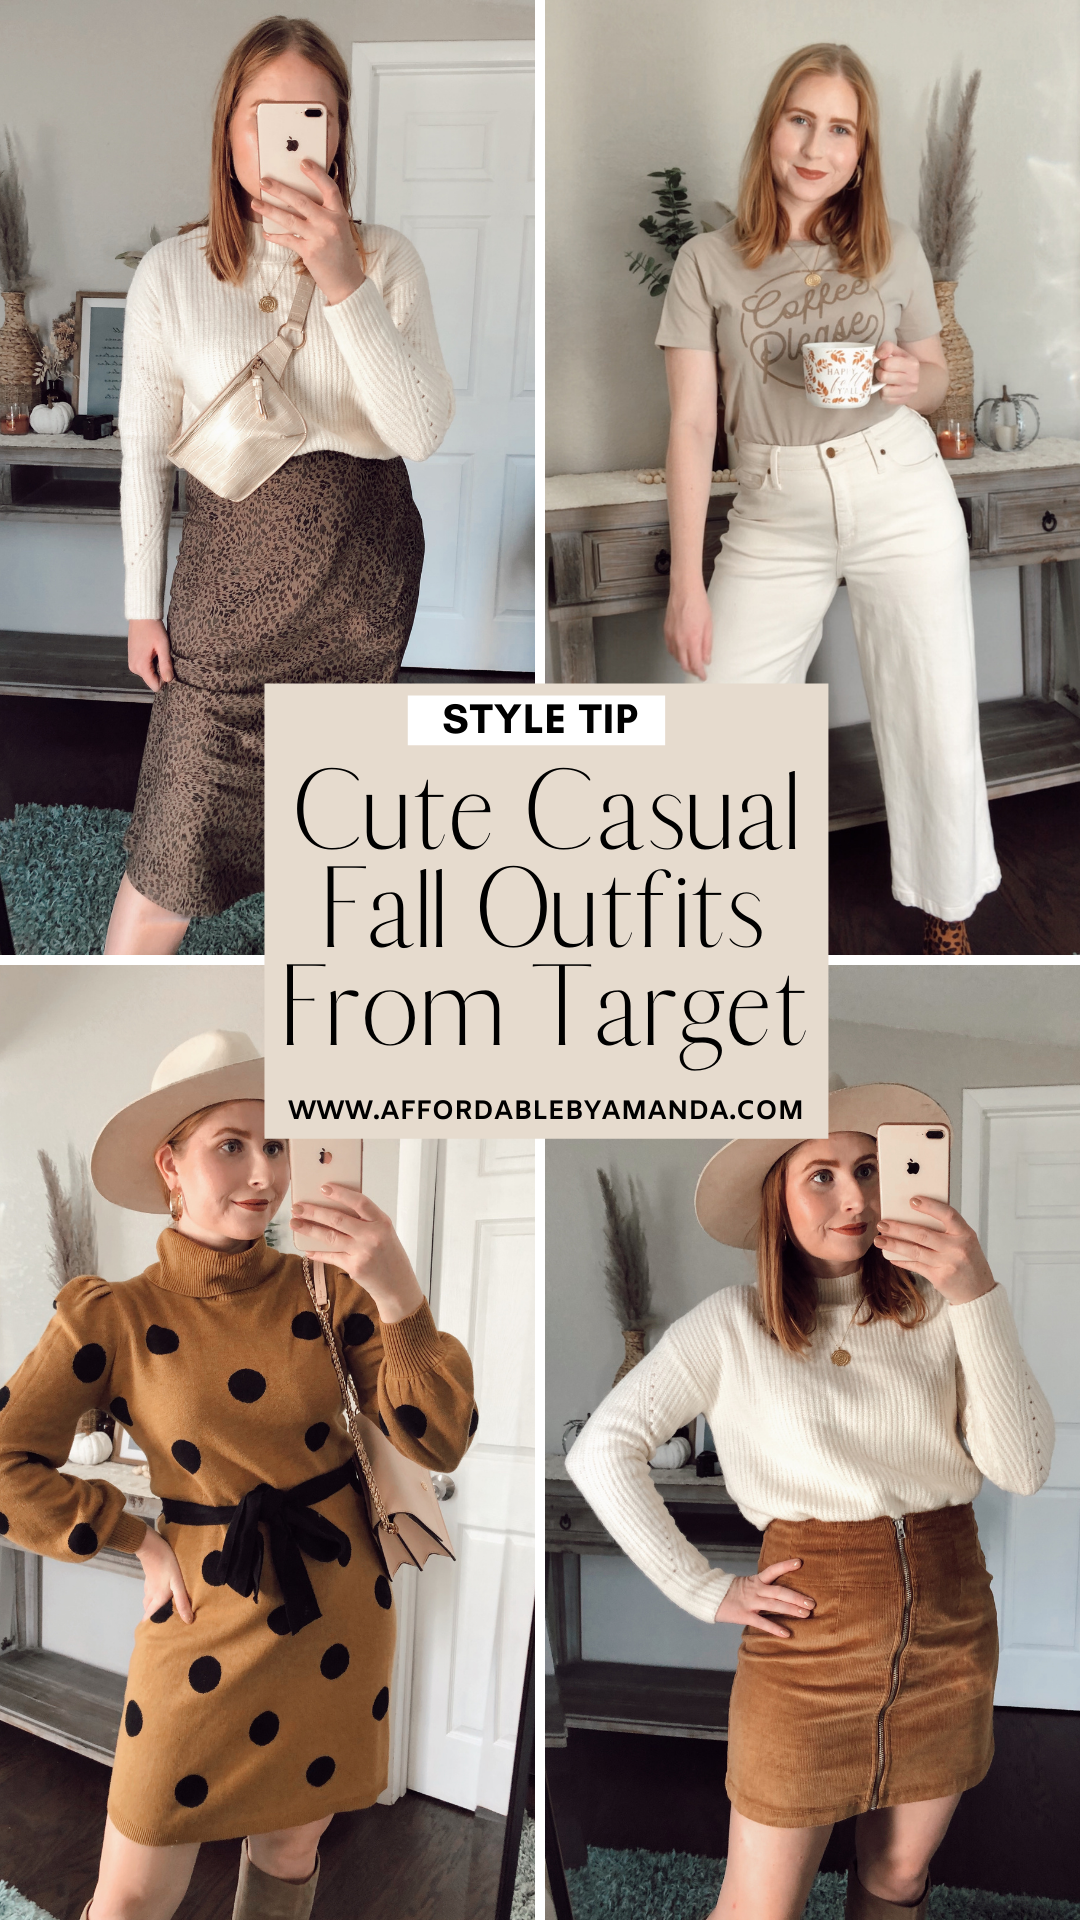 Cute Casual Fall Outfits From Target | Affordable by Amanda